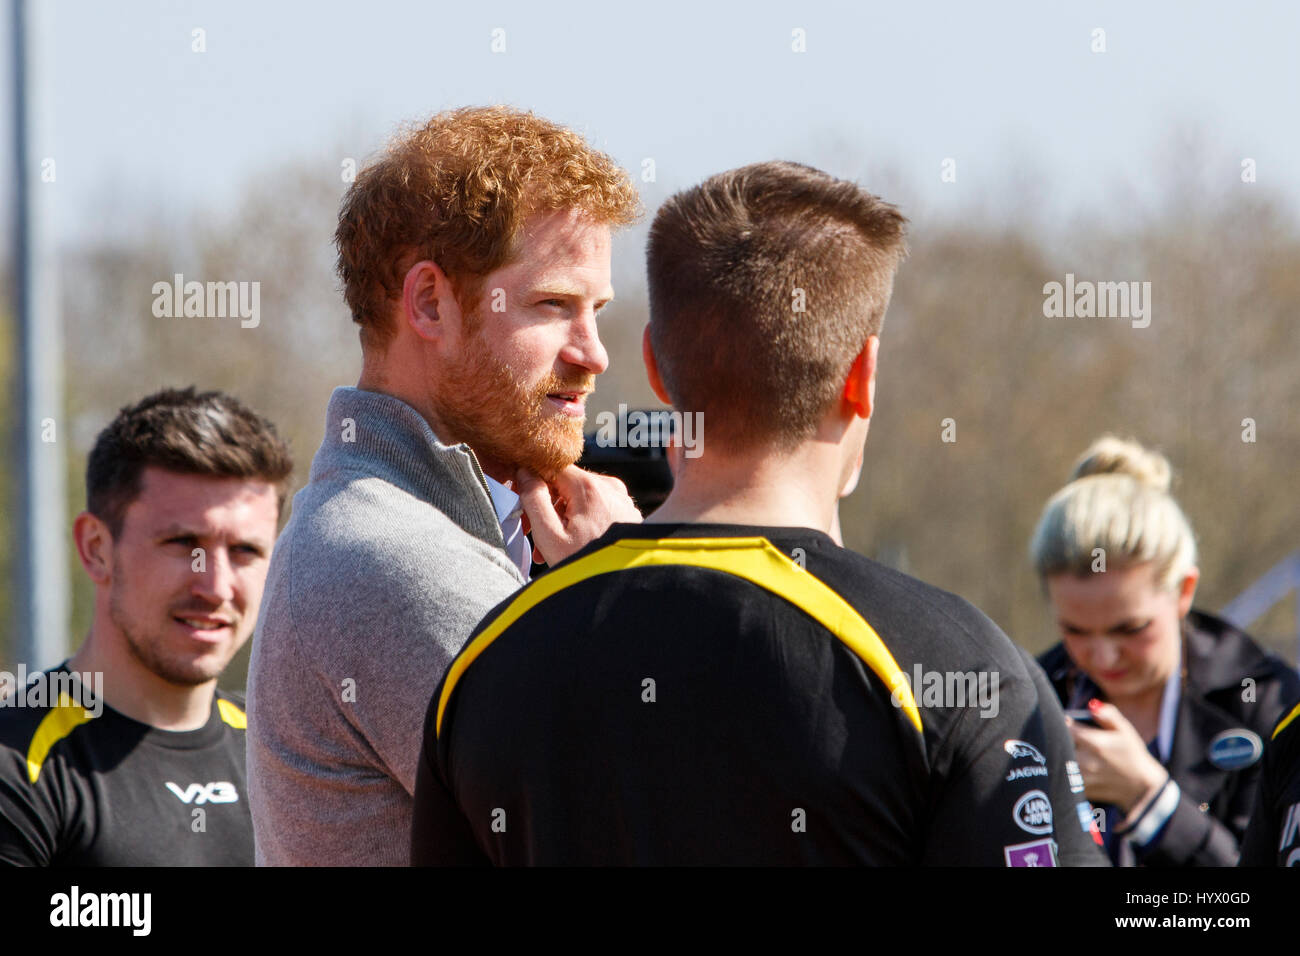 Bath, UK, 7th April, 2017. Prince Harry is pictured talking to Athlete's at the University of Bath Sports Training Village during his visit to the UK team trials for the 2017 Invictus Games. The games are a sporting event for injured active duty and veteran service members,more than 550 competitors from 17 nations will compete in a dozen adaptive sports in Toronto,Canada in September 2017. Credit: lynchpics/Alamy Live News Stock Photo